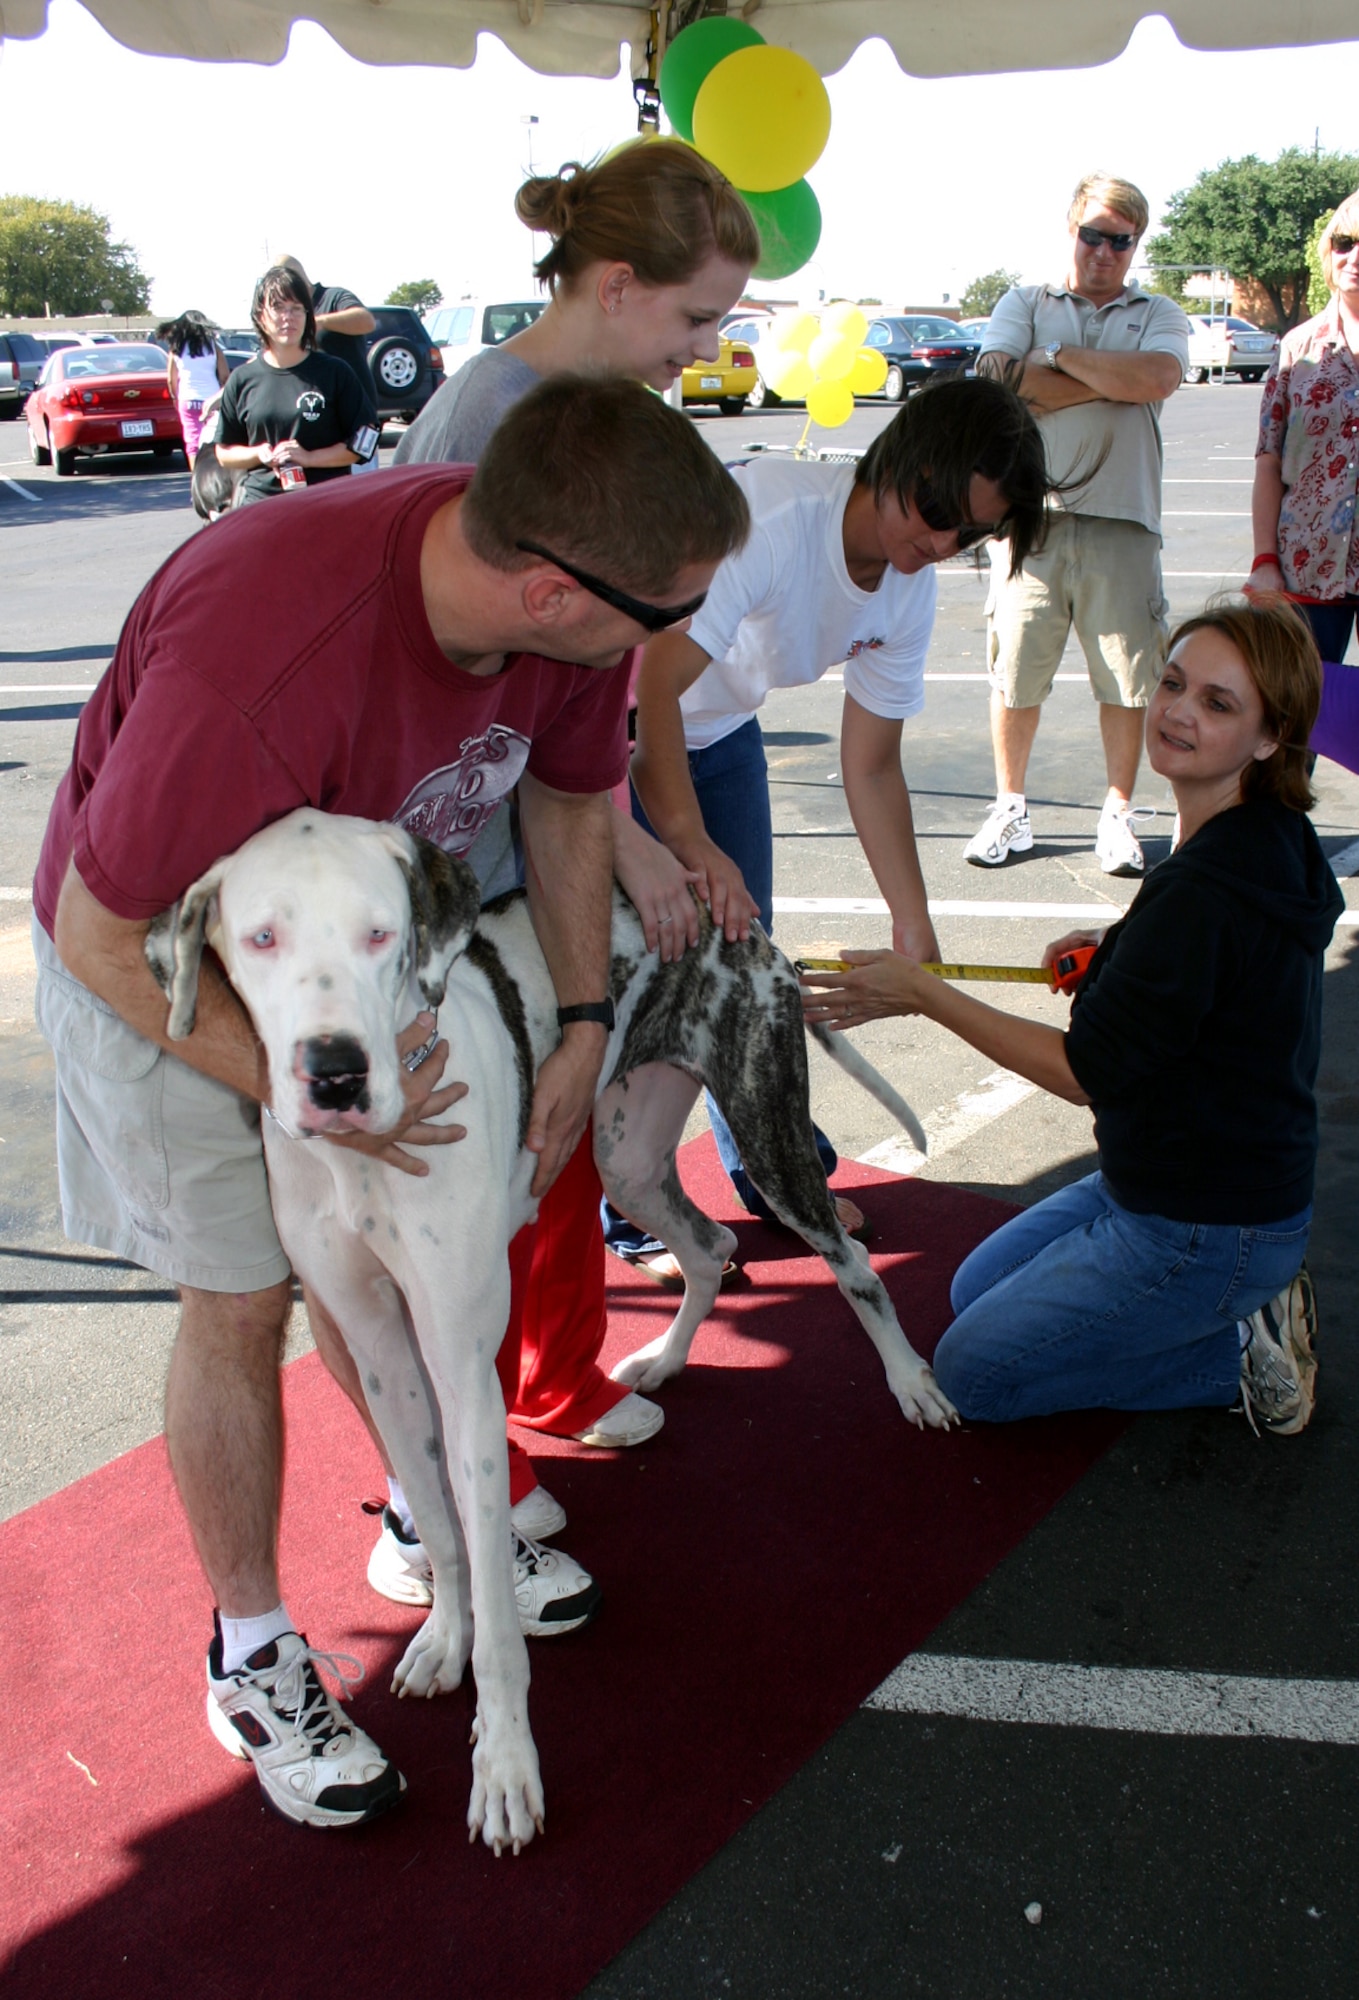 360th Training Squadron Commander Lt. Col. Glenn Roberts and daughter Jillian present their dog Georgia for the longest tail competition at the Dog Show in the base exchange parking lot Oct. 13.  Measuring Georgia's tail are 382nd TRS's Lt. Col. Teri Russell and Senior Airman Emily Williams. Georgia took second place. (U.S. Air Force photo/Staff Sgt. Tonnette Thompson)